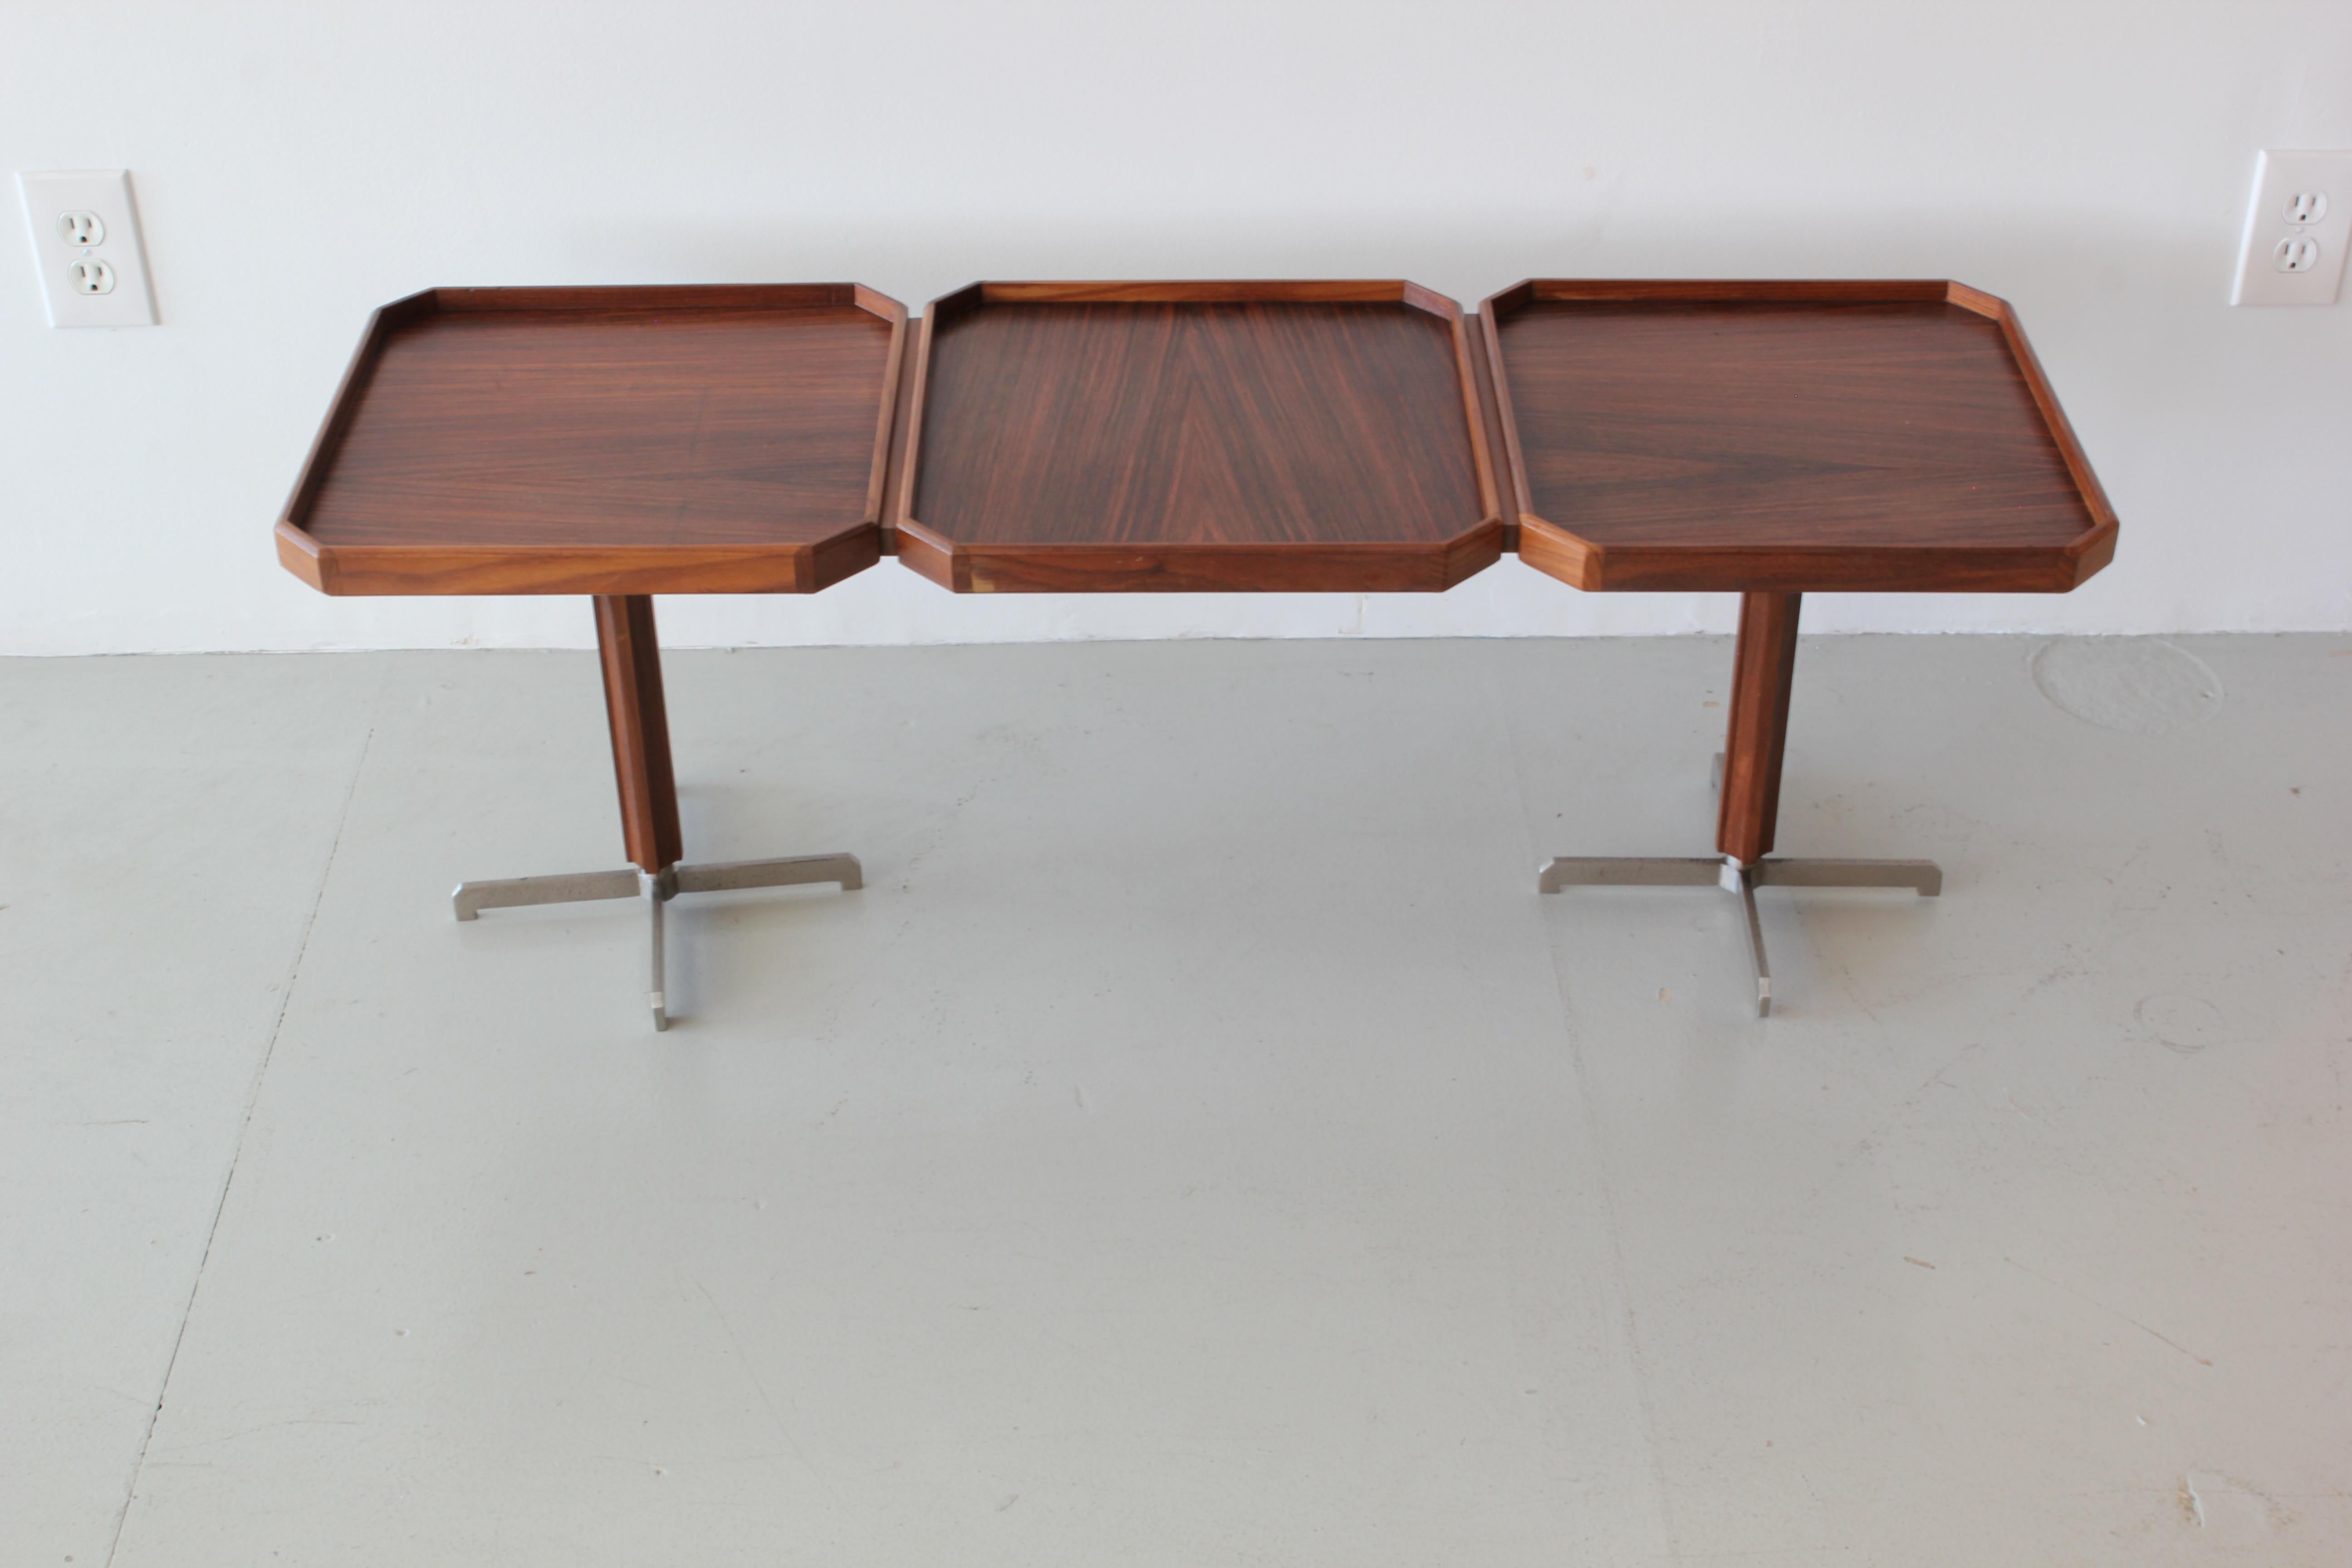 Unique 1950s Italian geometric coffee table 
Teak squares with grain going opposite directions 
brushed steel base

Lower console tables still available. 